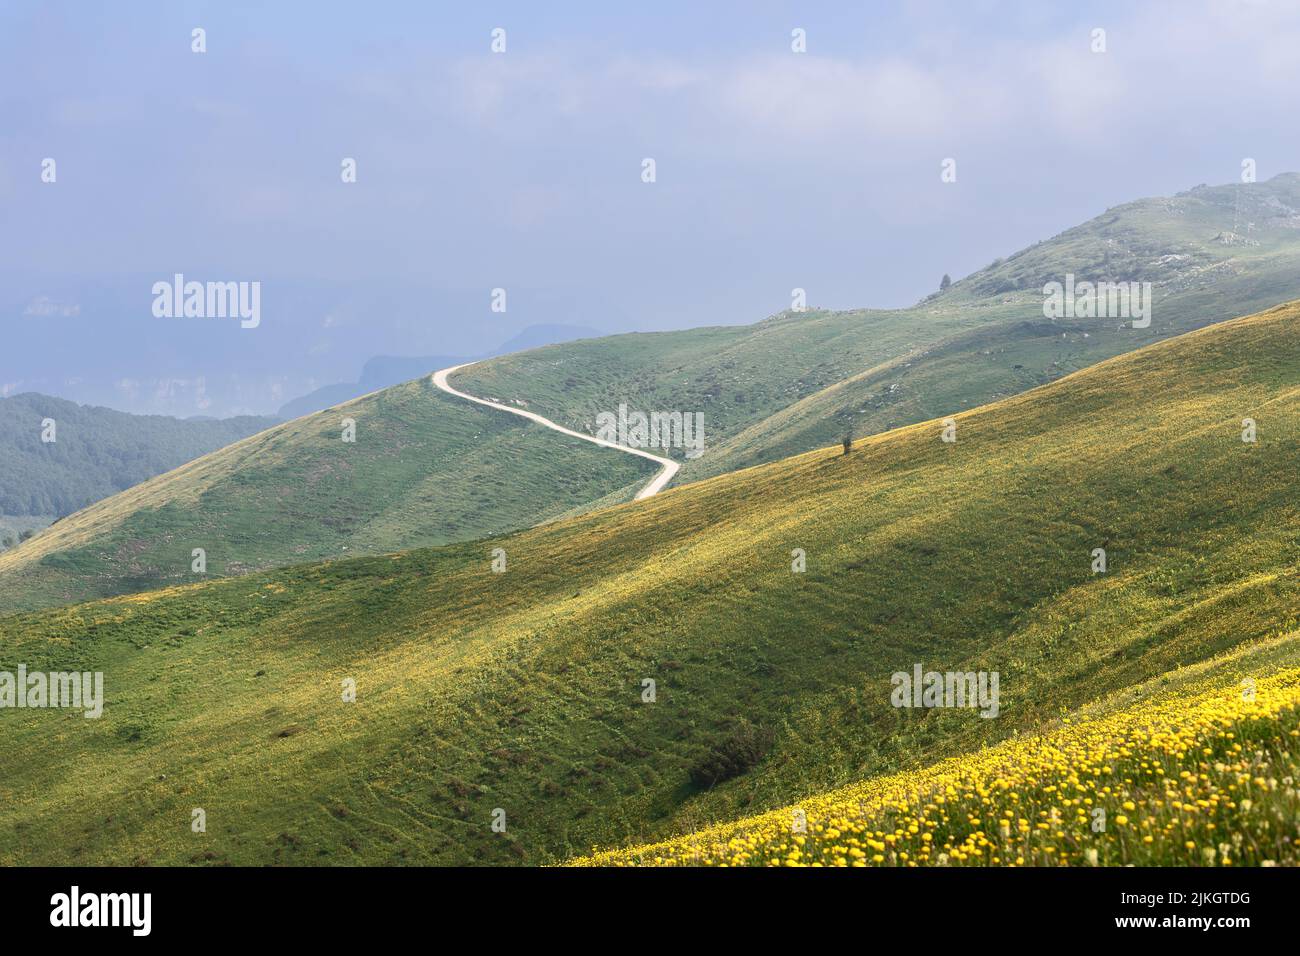 Сountry road meanders along the endless slopes of alpine flowering meadows, Verona, Italy Stock Photo